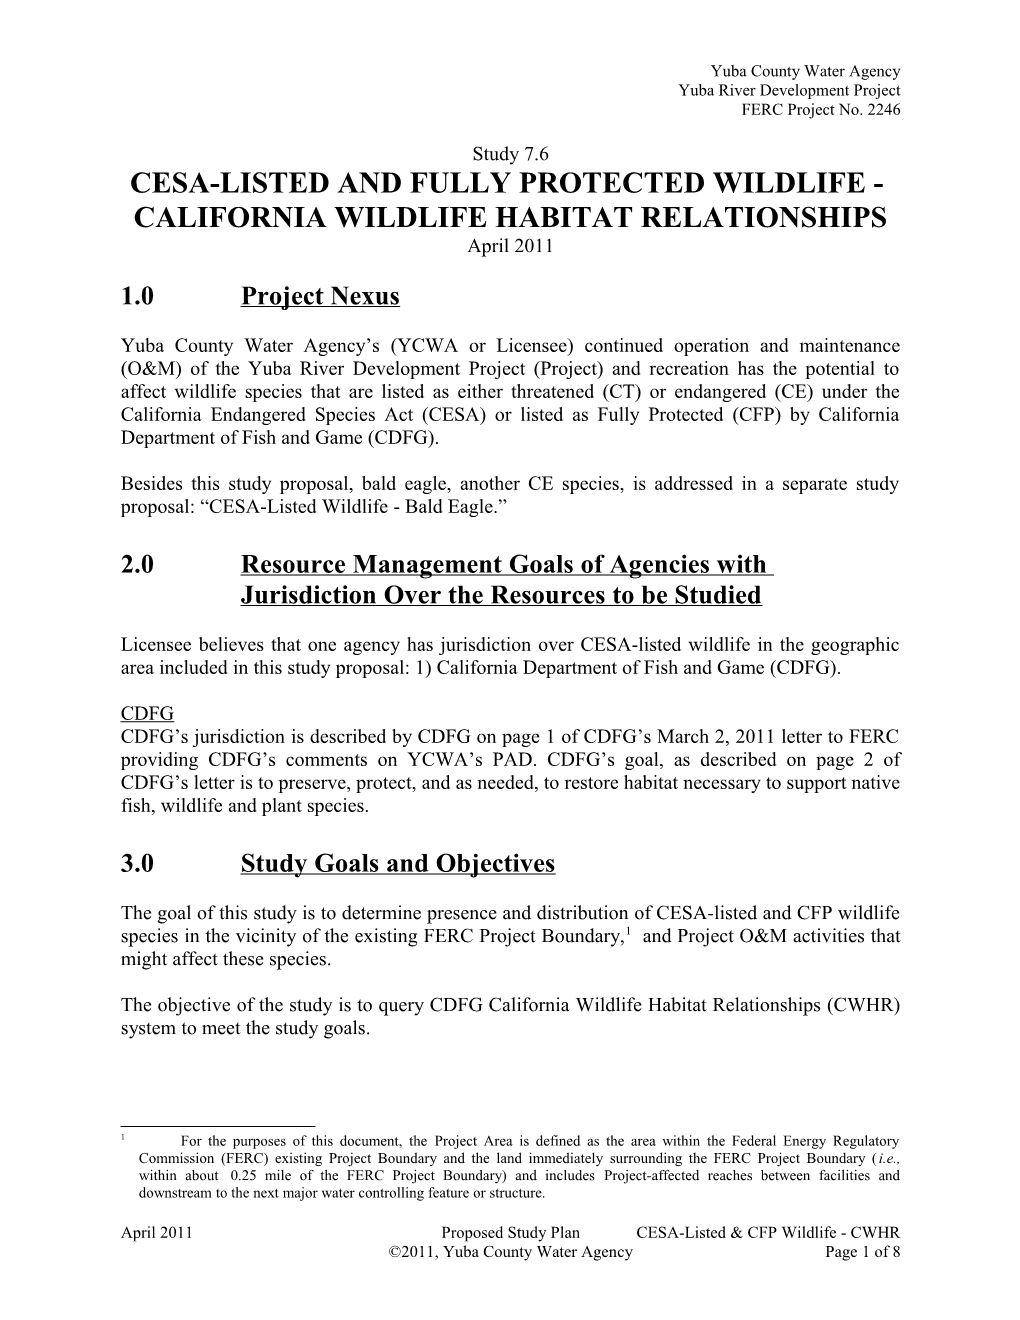 CESA-Listed and Fully Protected Wildlife - CWHR